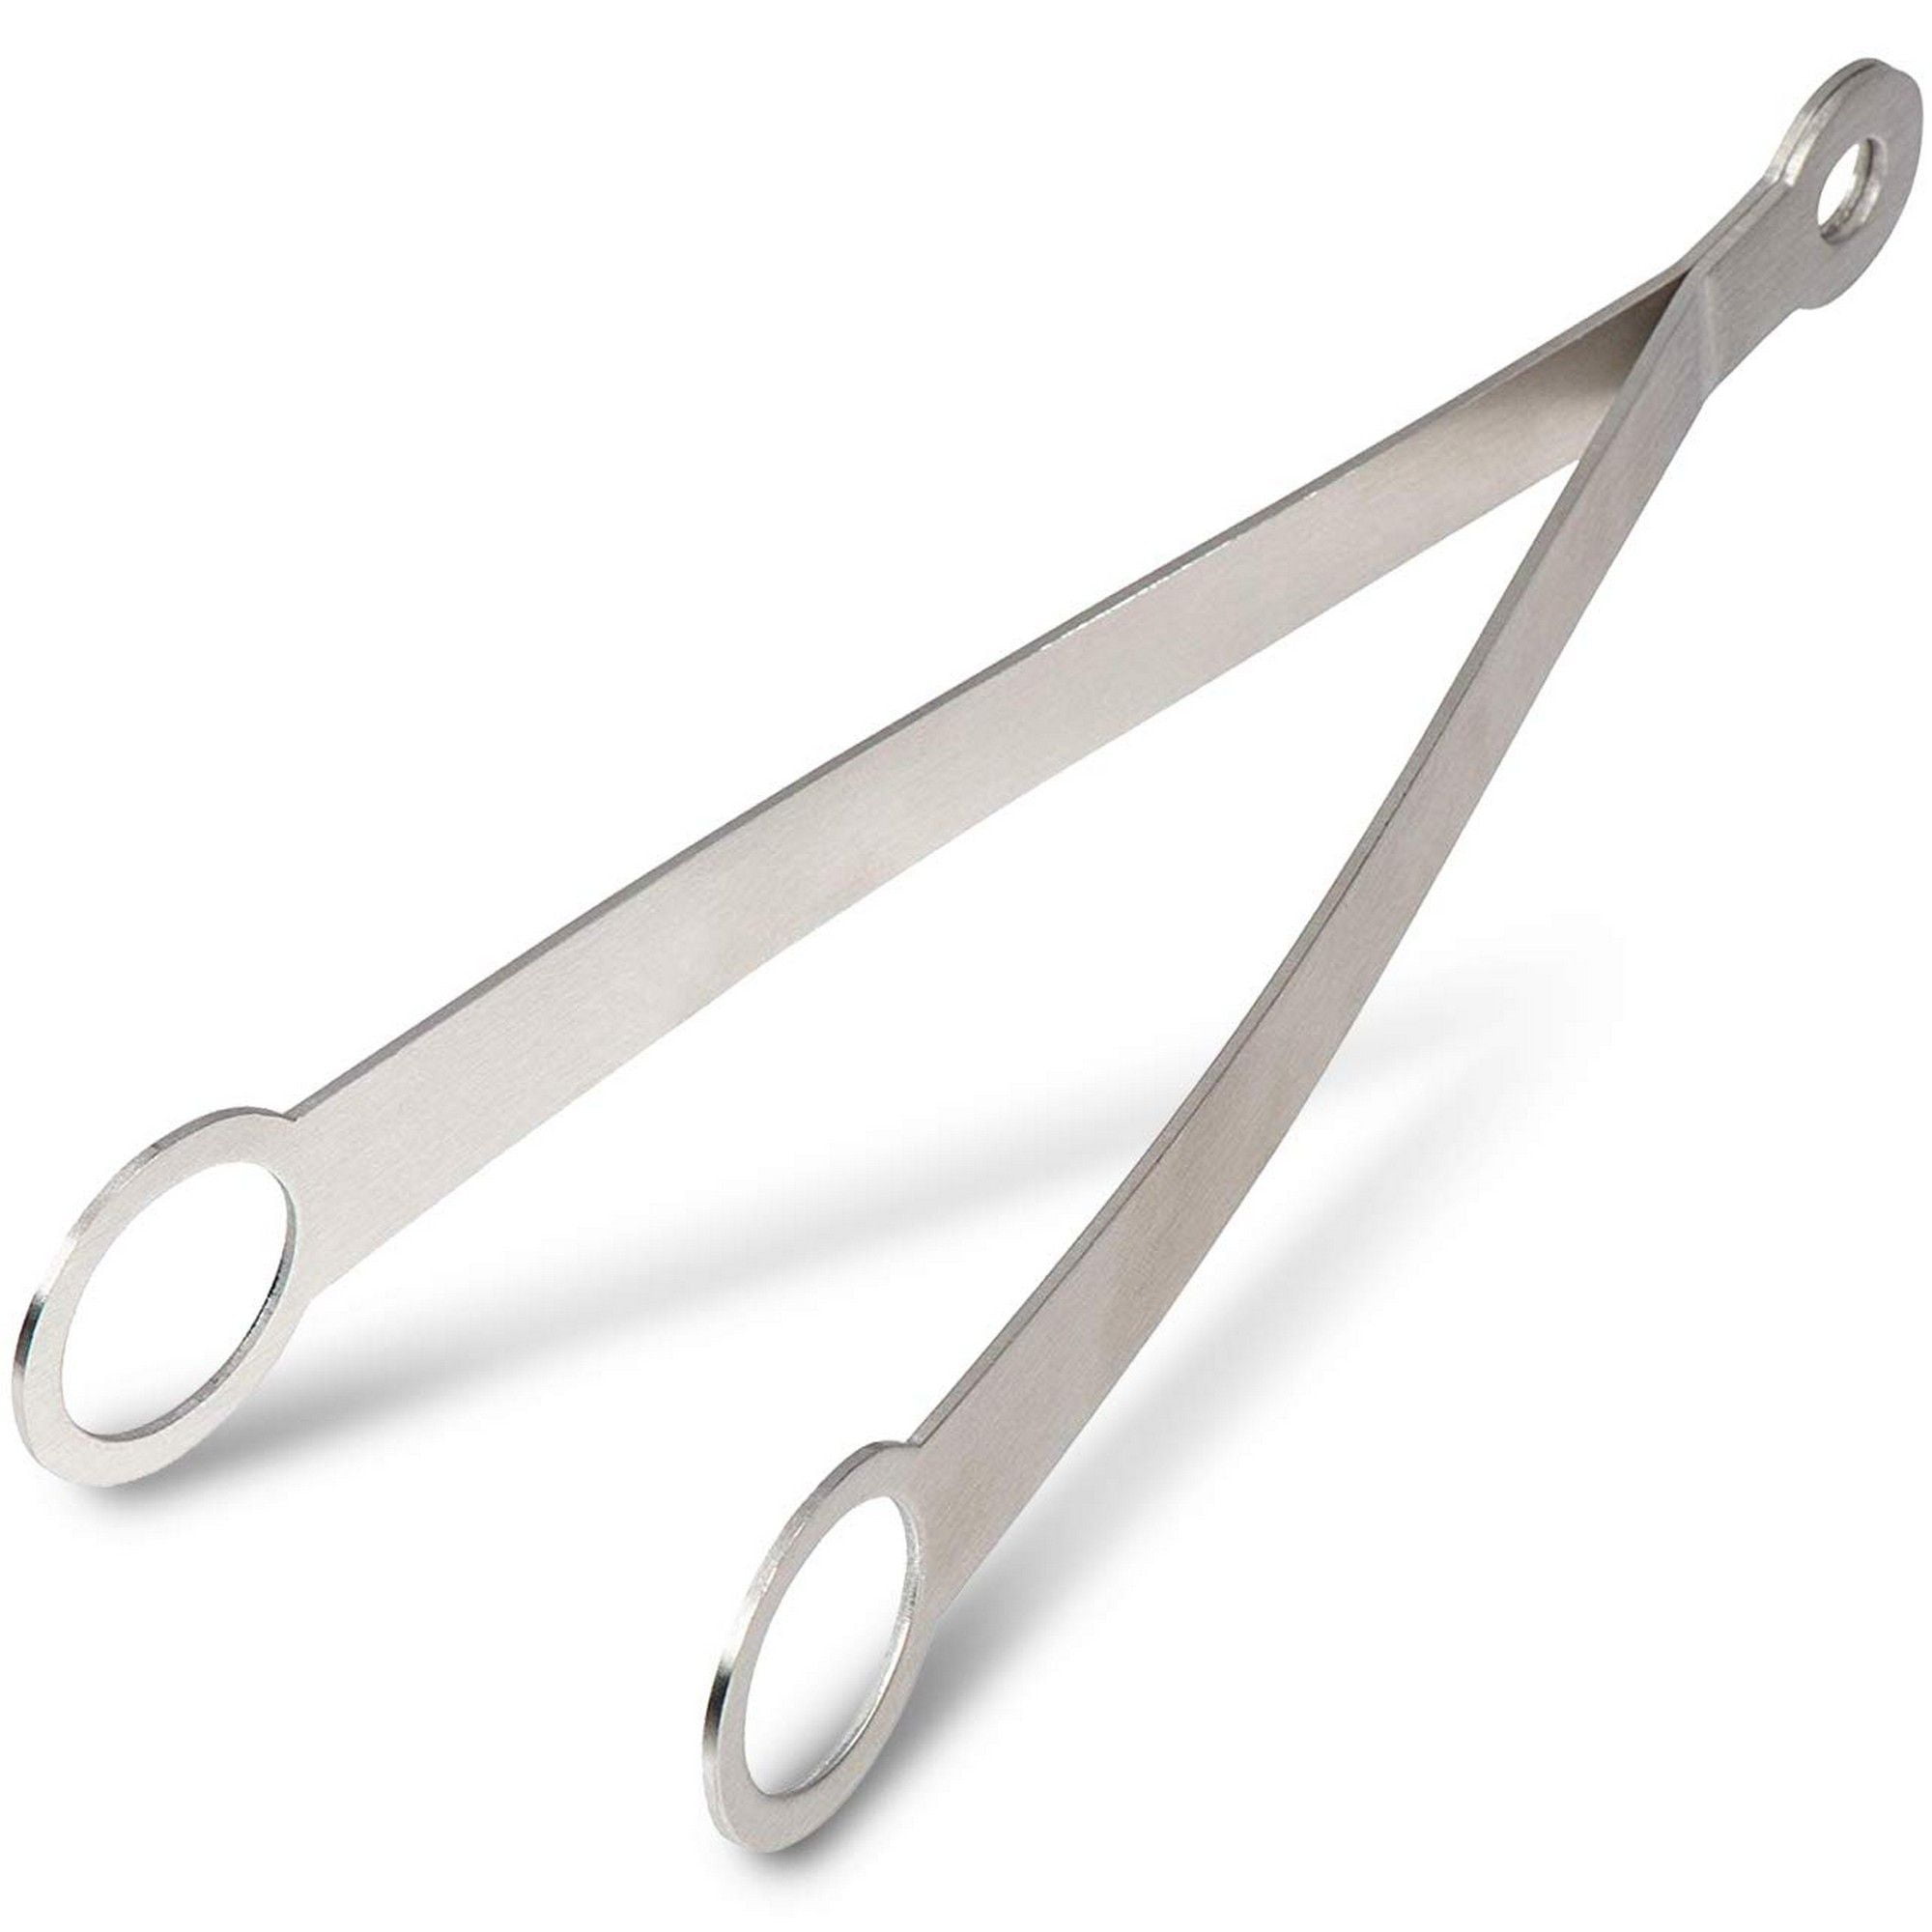 6 Inch Stainless Steel Ice or Sweet Tong Pack of 5